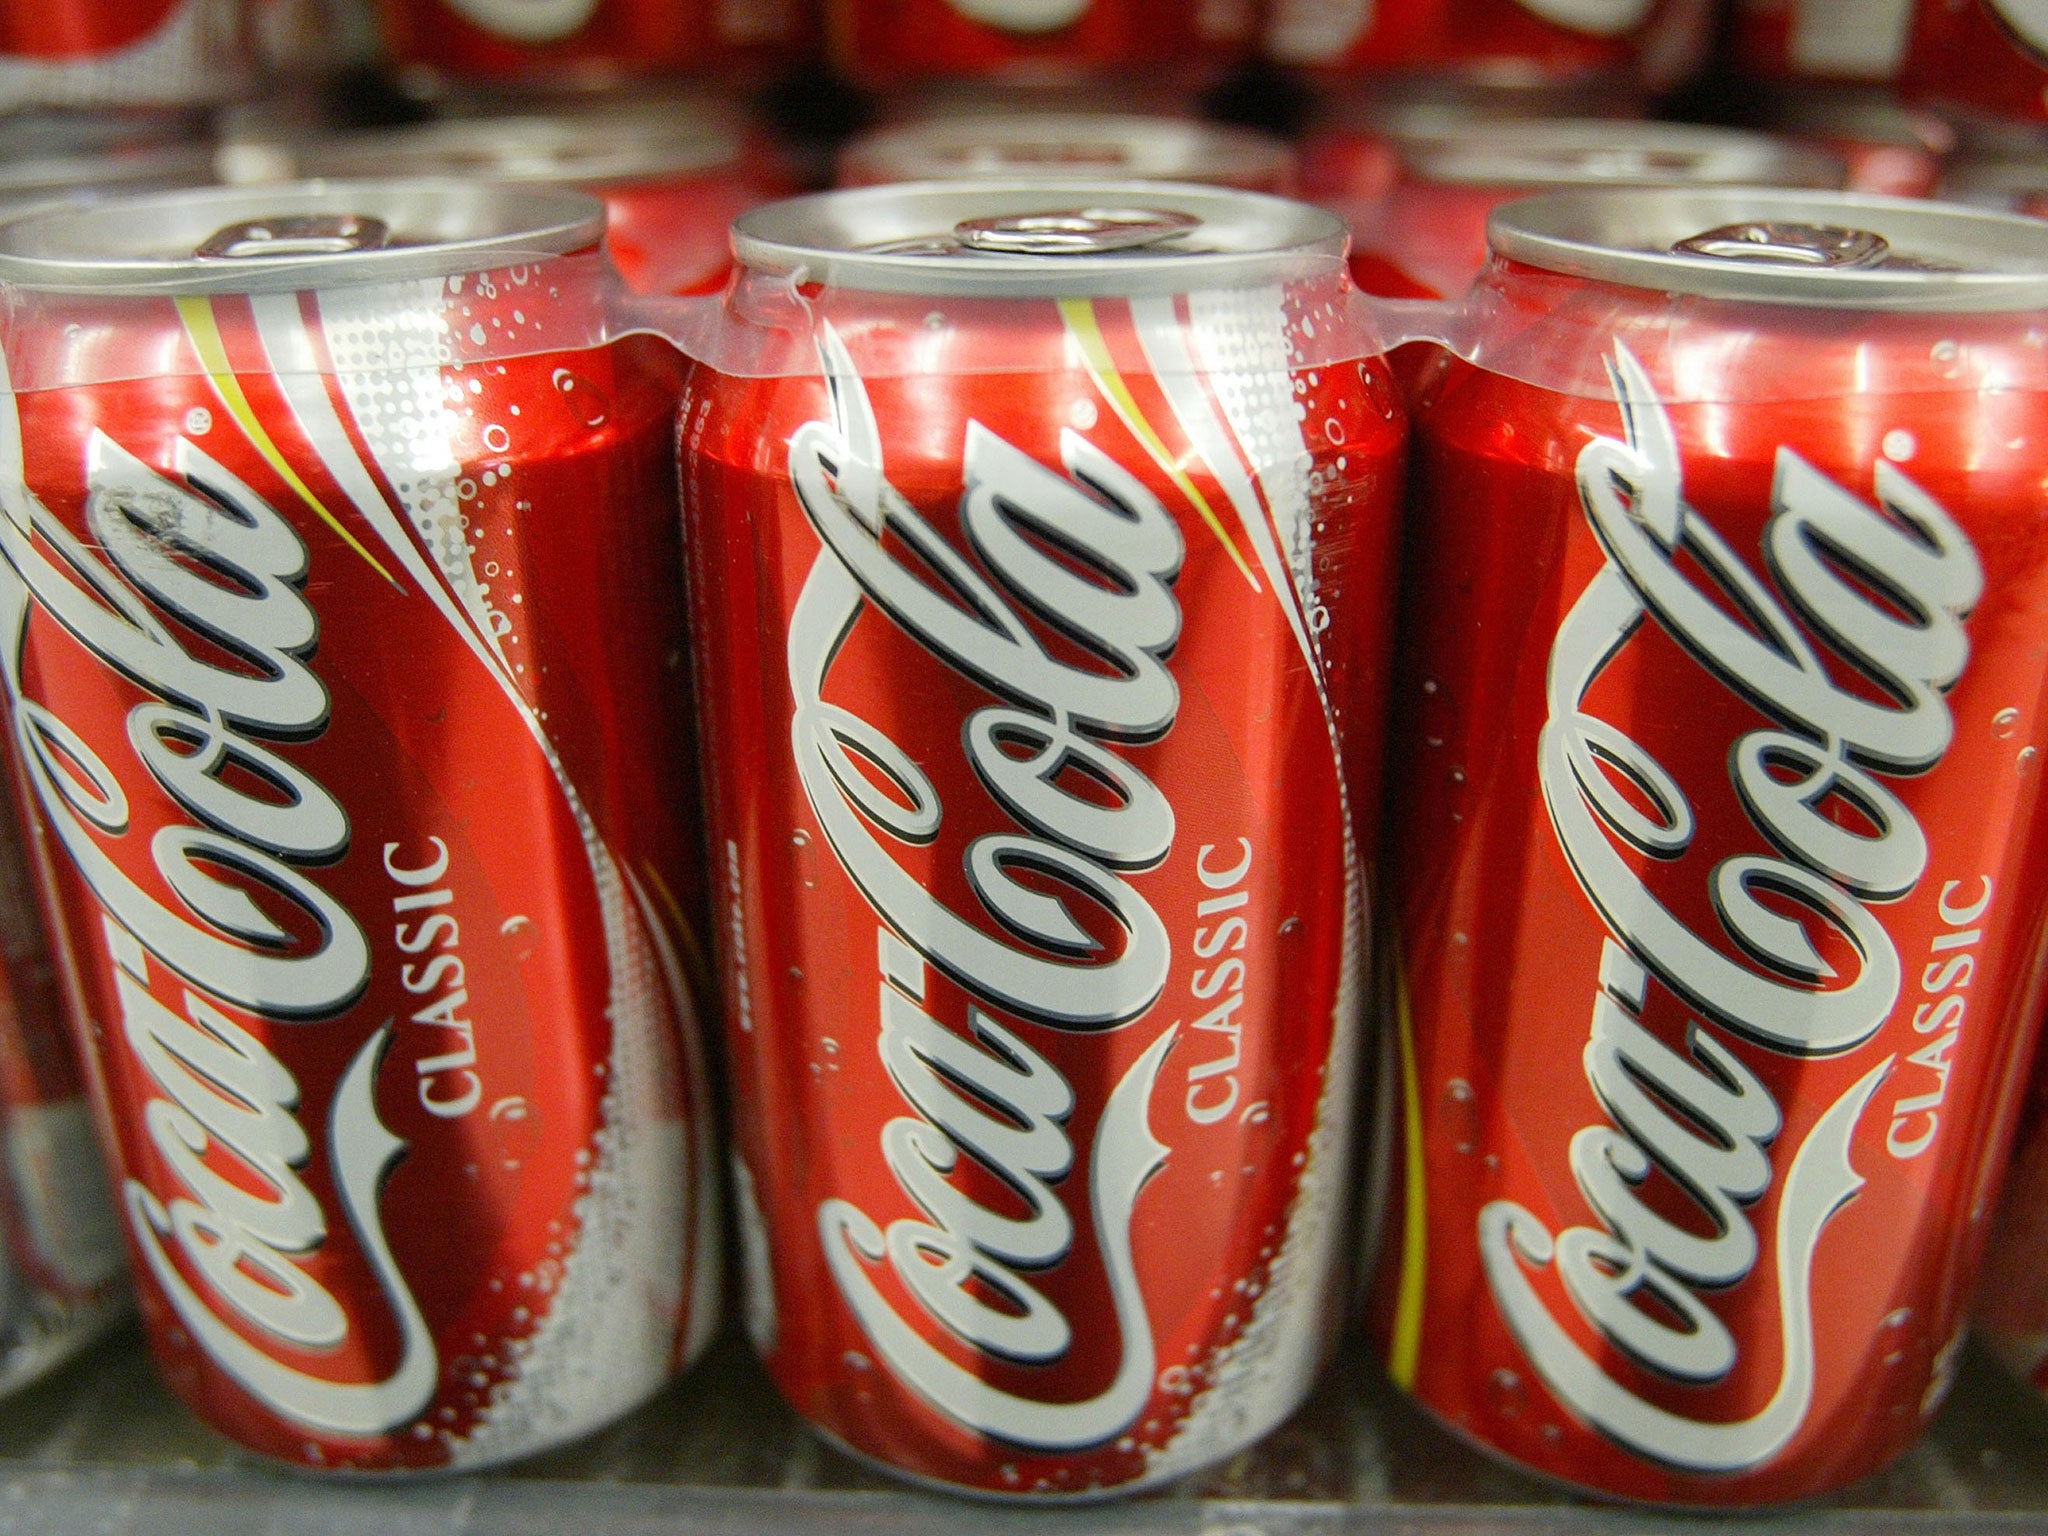 Cans of Coca-Cola contains 35g of sugar per can, or seven teaspoons